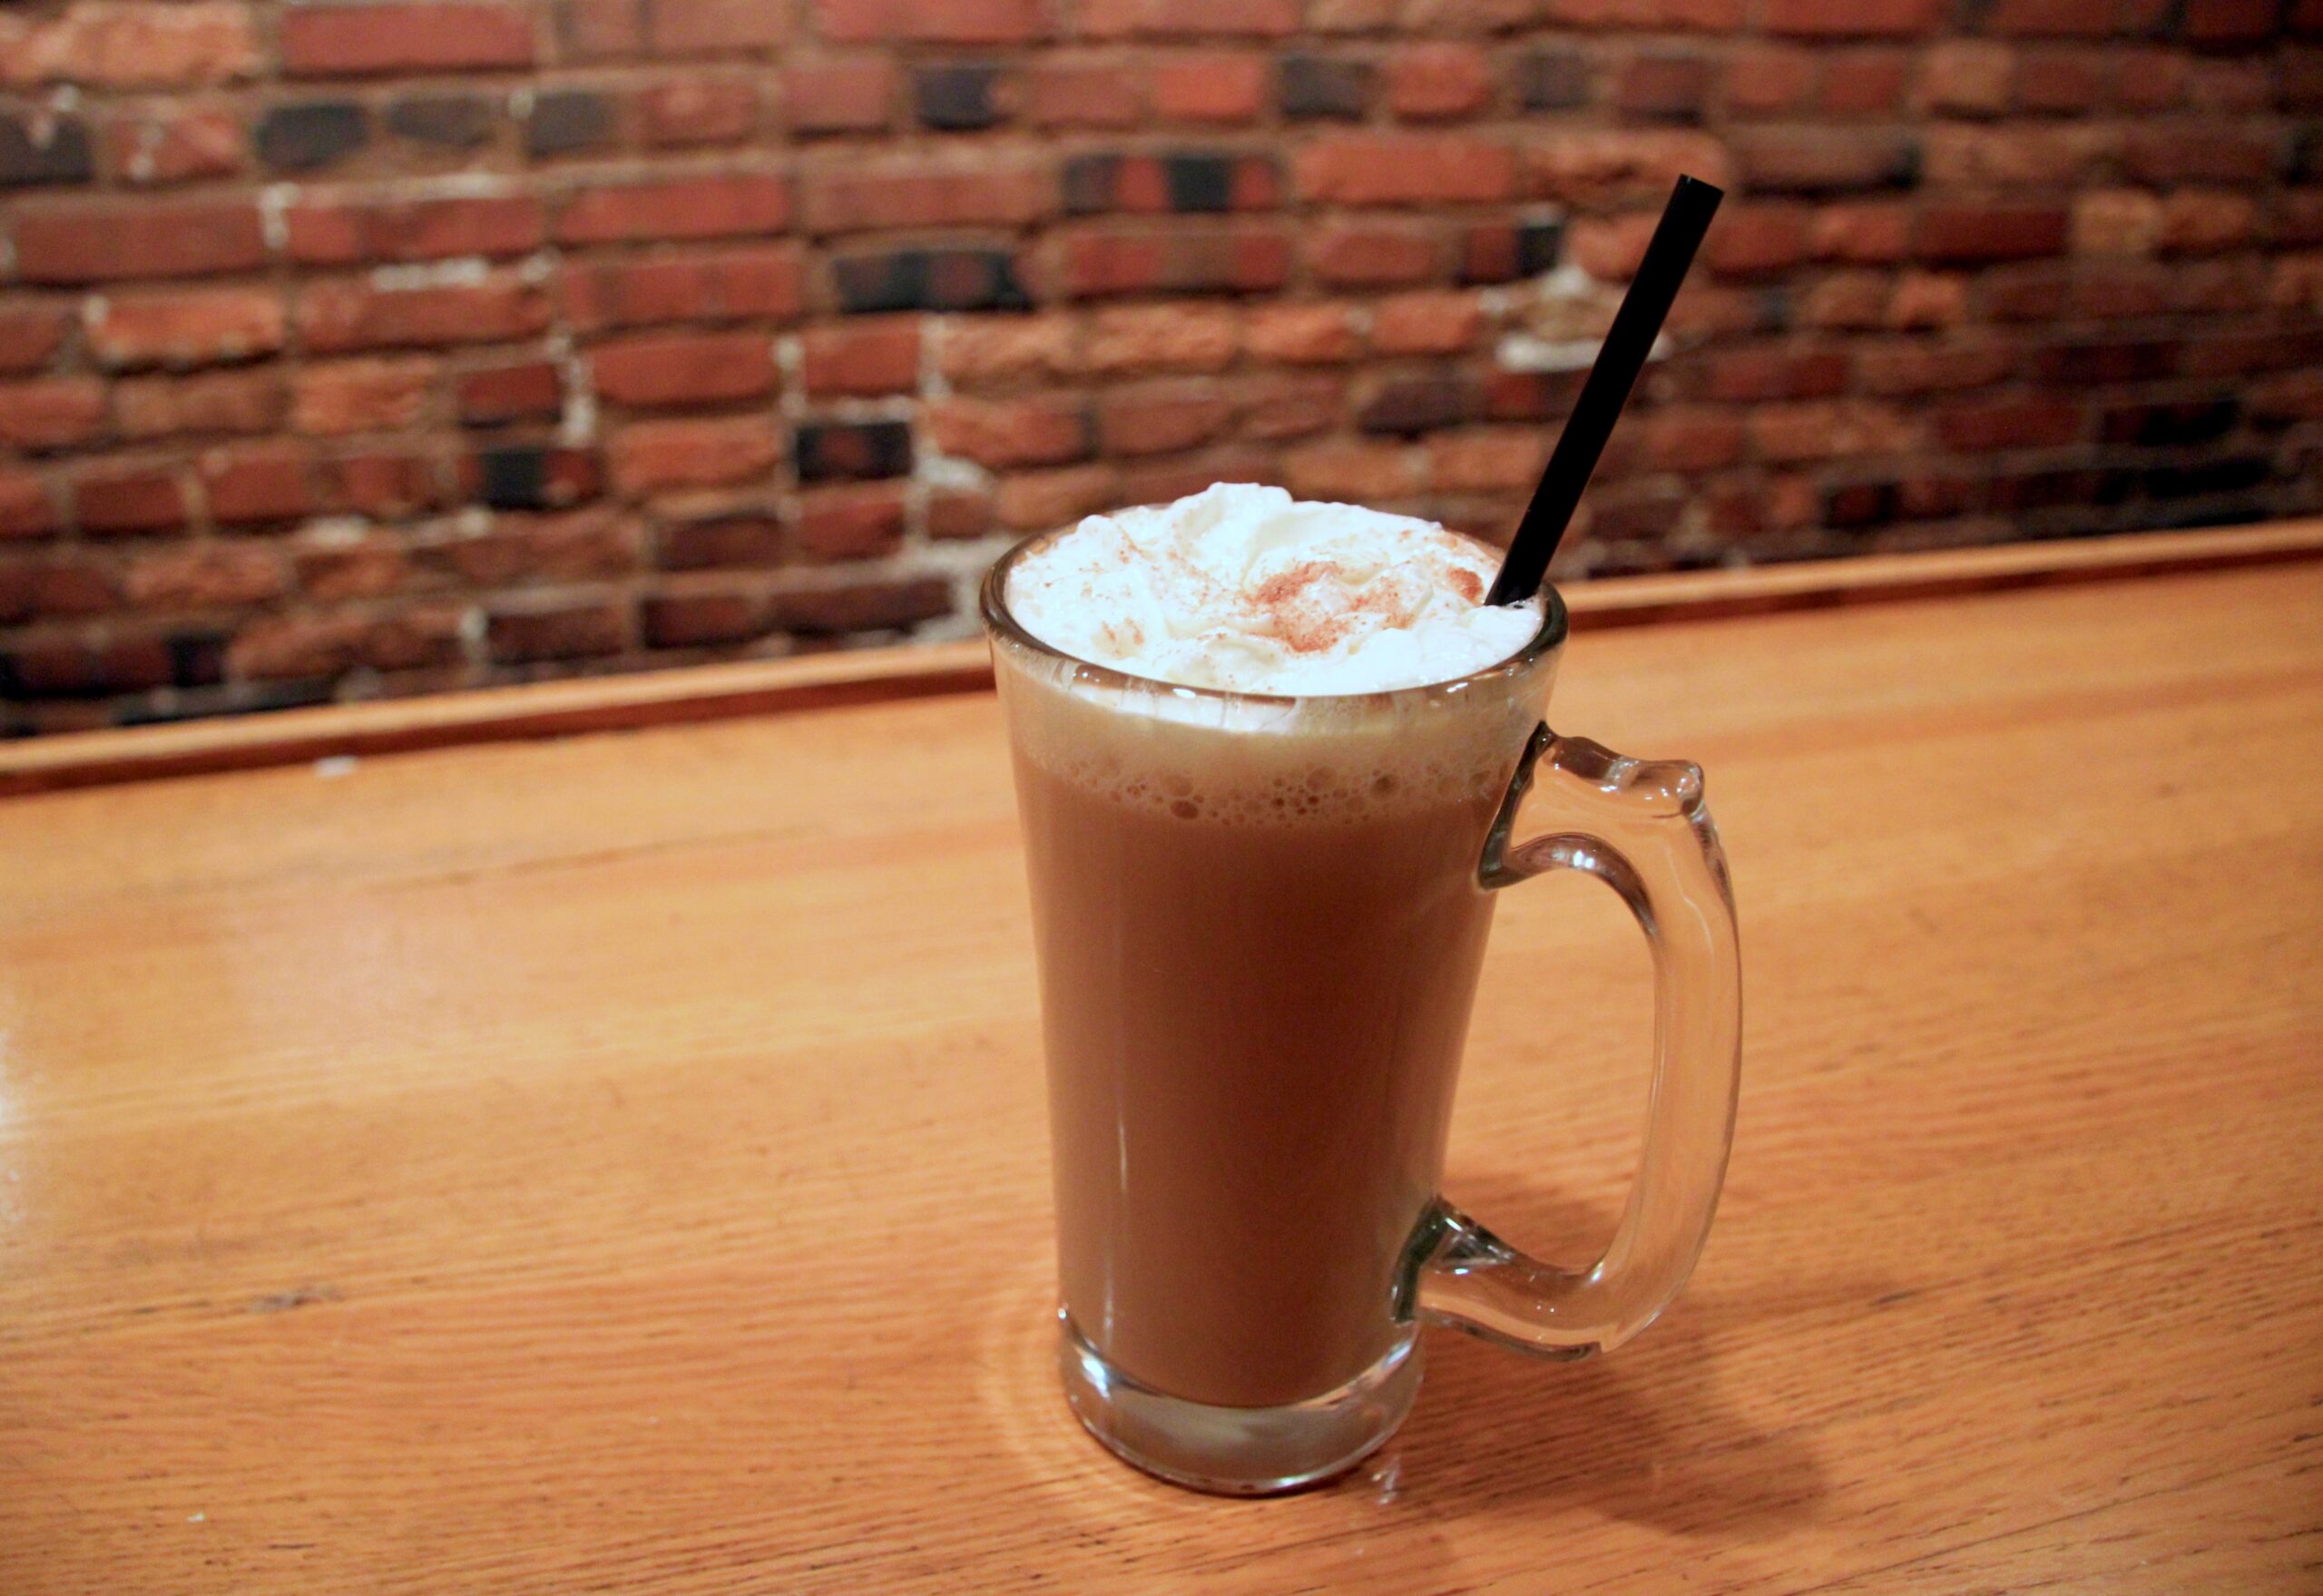 The Nutty Irishman is a fun coffee and alcohol drink!